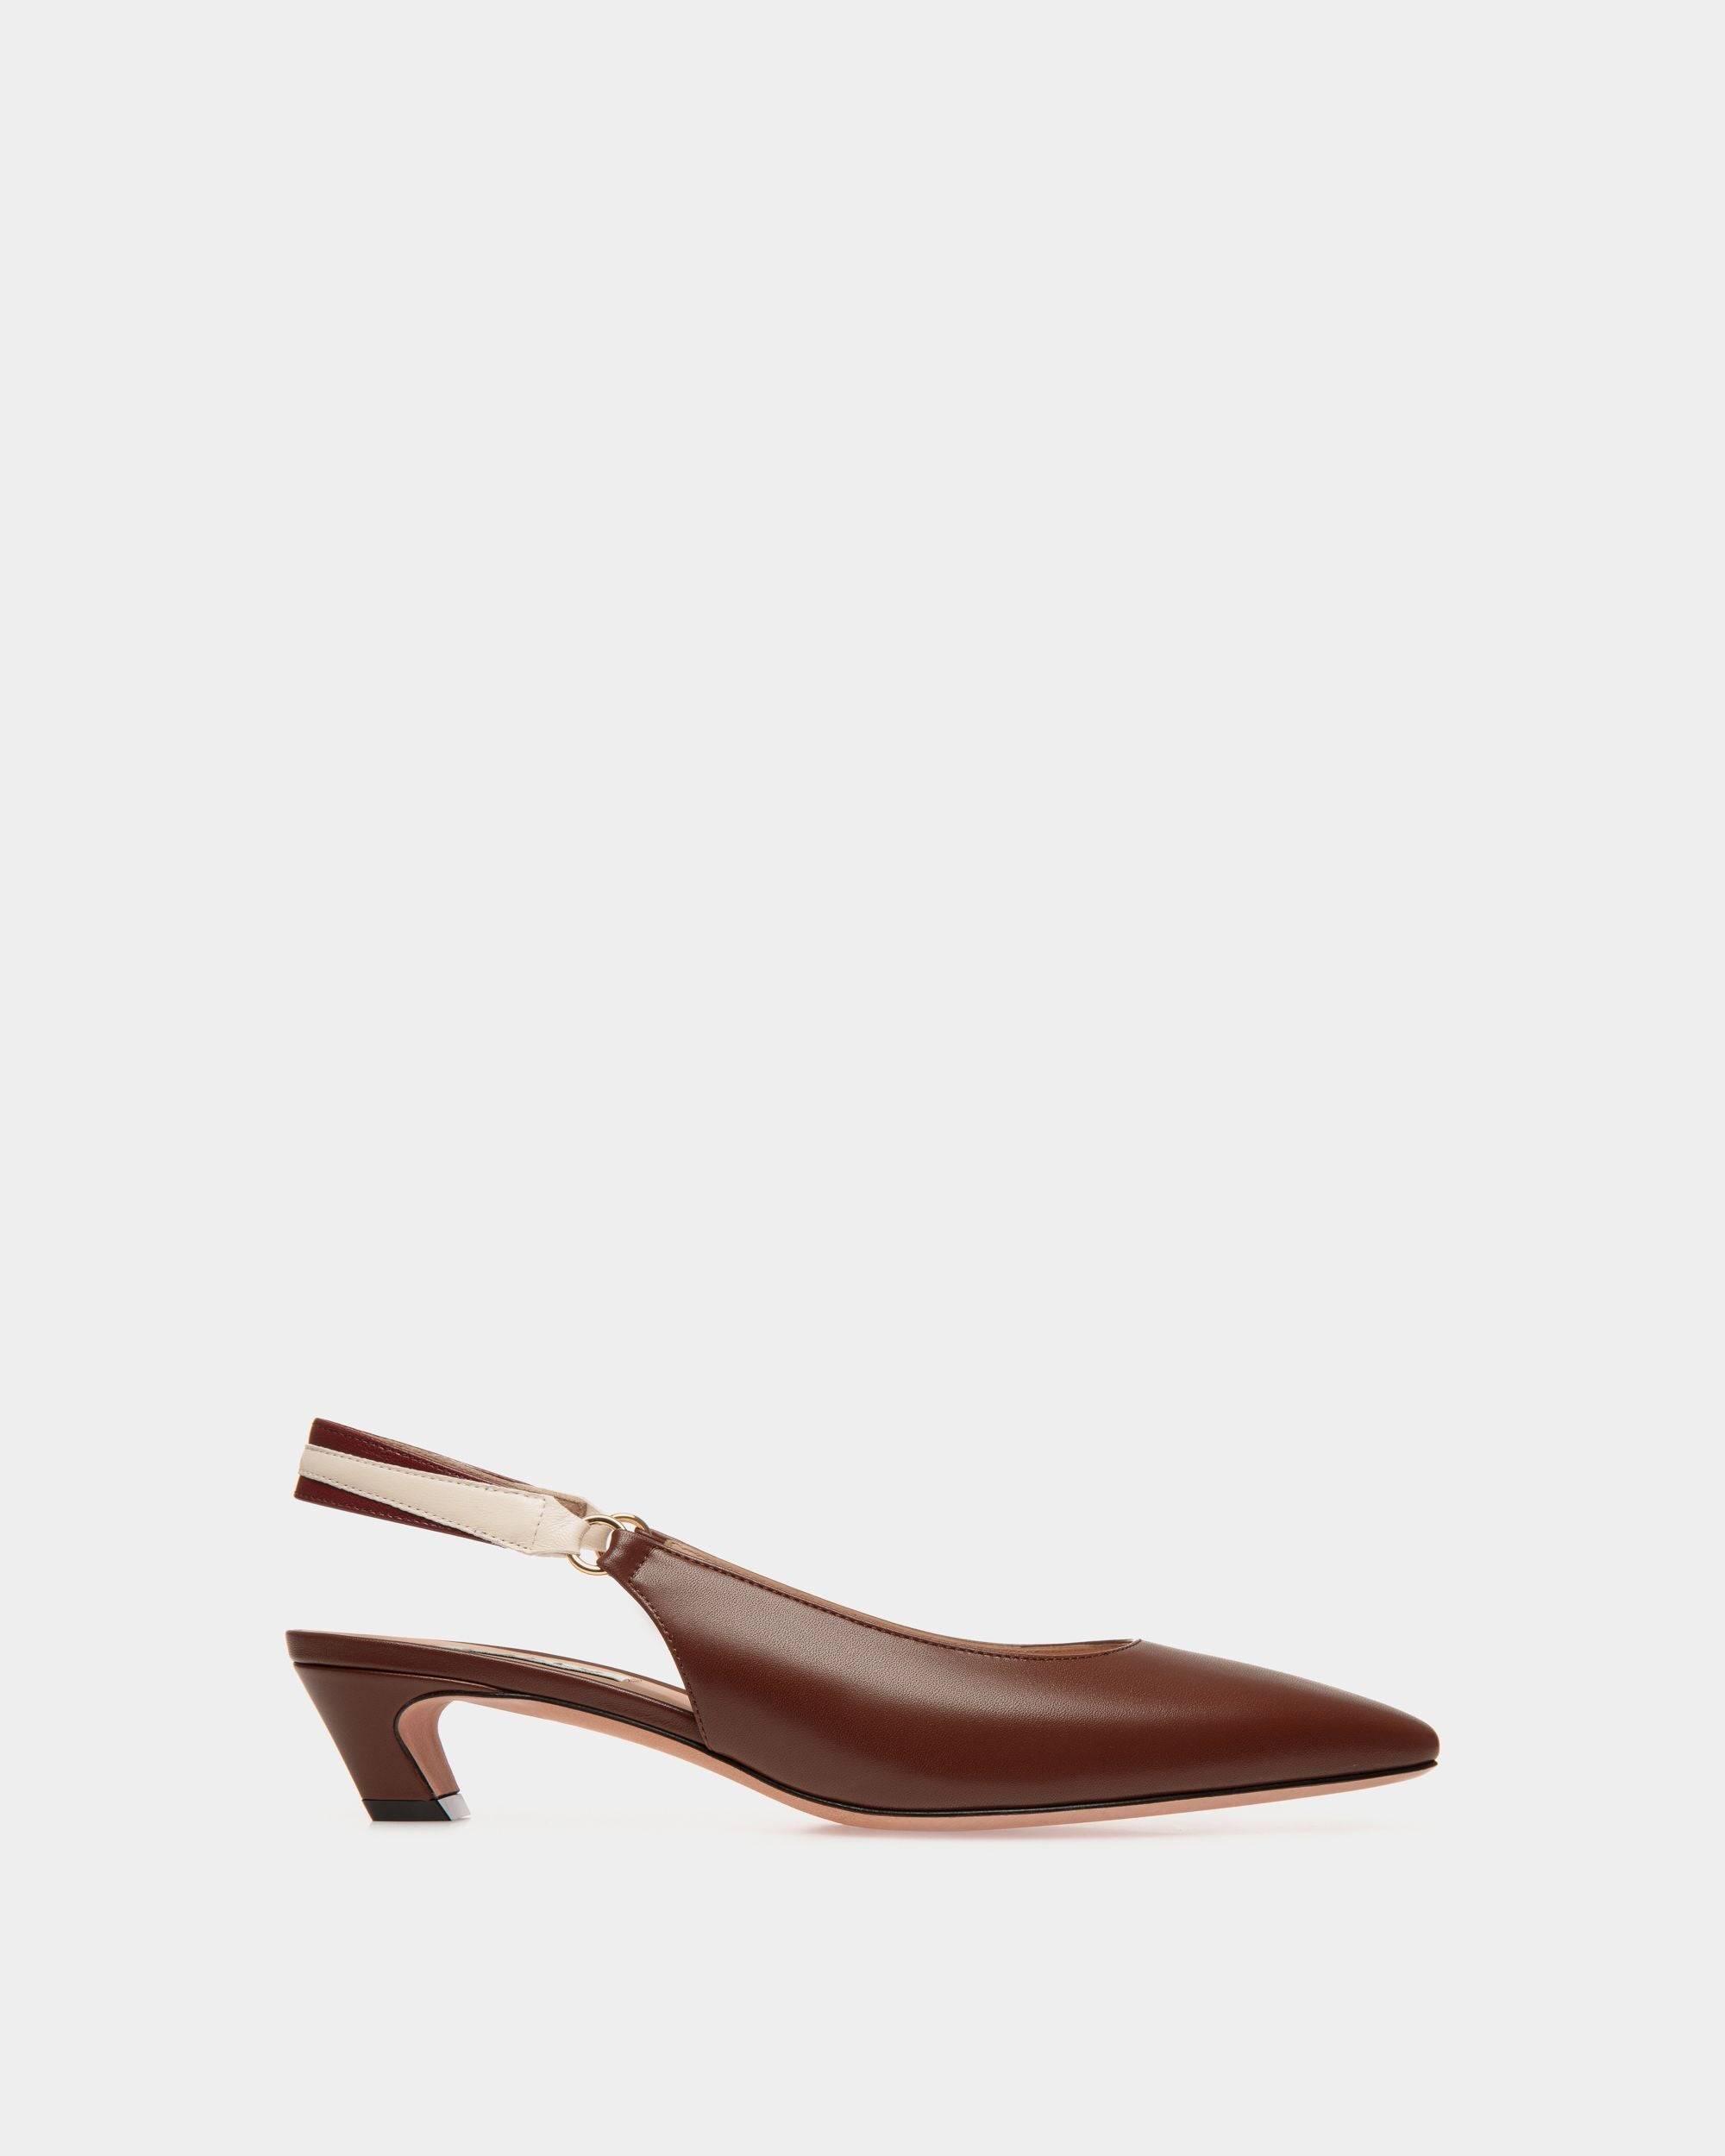 Sylt Slingback Pump In Brown Nappa Leather - Women's - Bally - 01